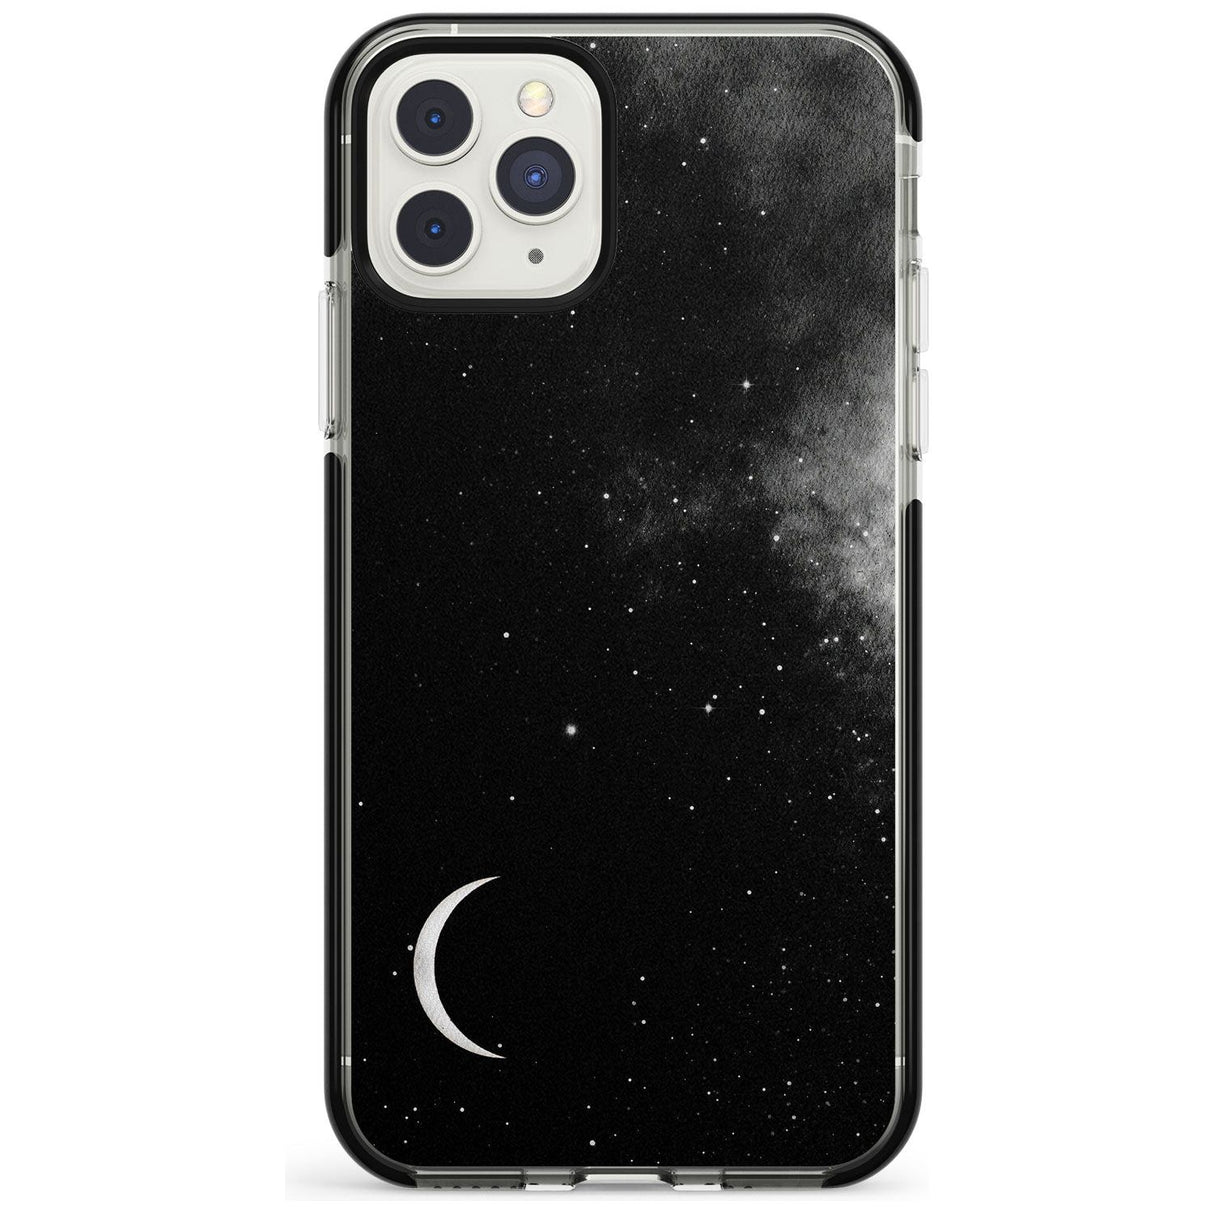 Night Sky Galaxies: Crescent Moon Phone Case iPhone 11 Pro Max / Black Impact Case,iPhone 11 Pro / Black Impact Case,iPhone 12 Pro Max / Black Impact Case Blanc Space